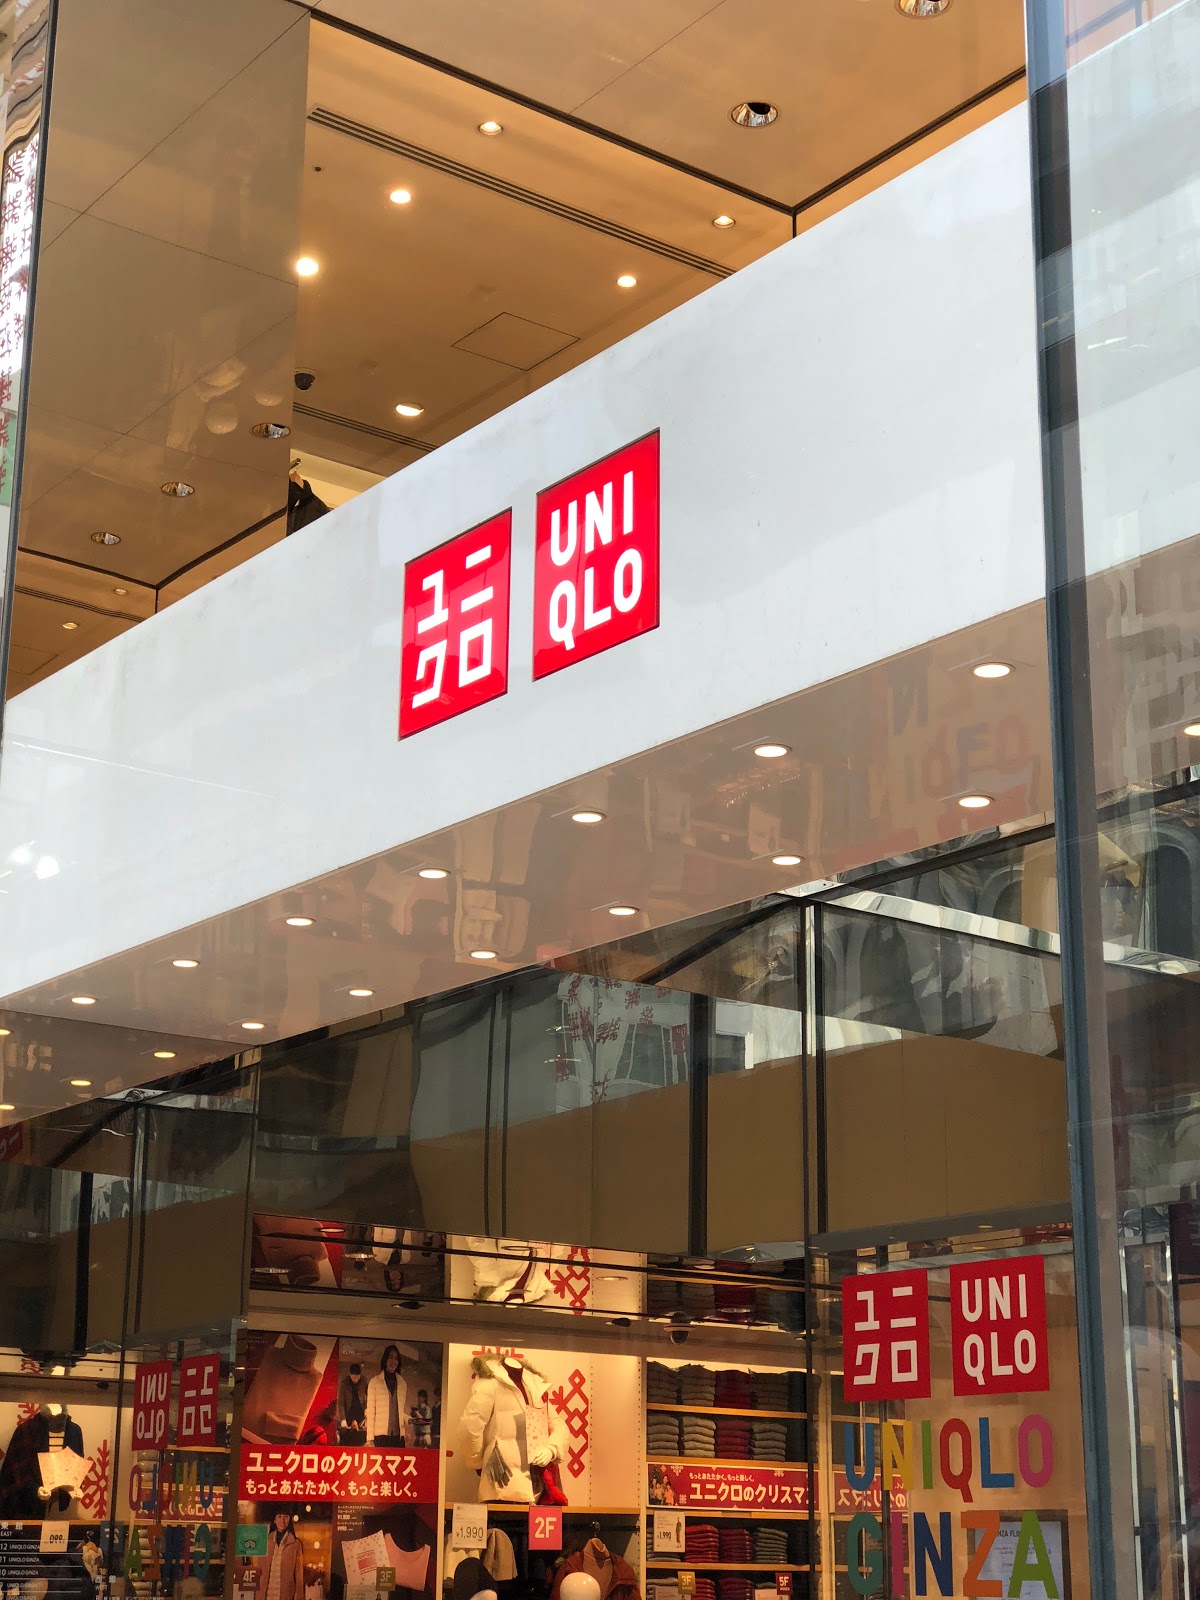 Uniqlo Park Japan: This Uniqlo Concept Store In Yokohama Is An